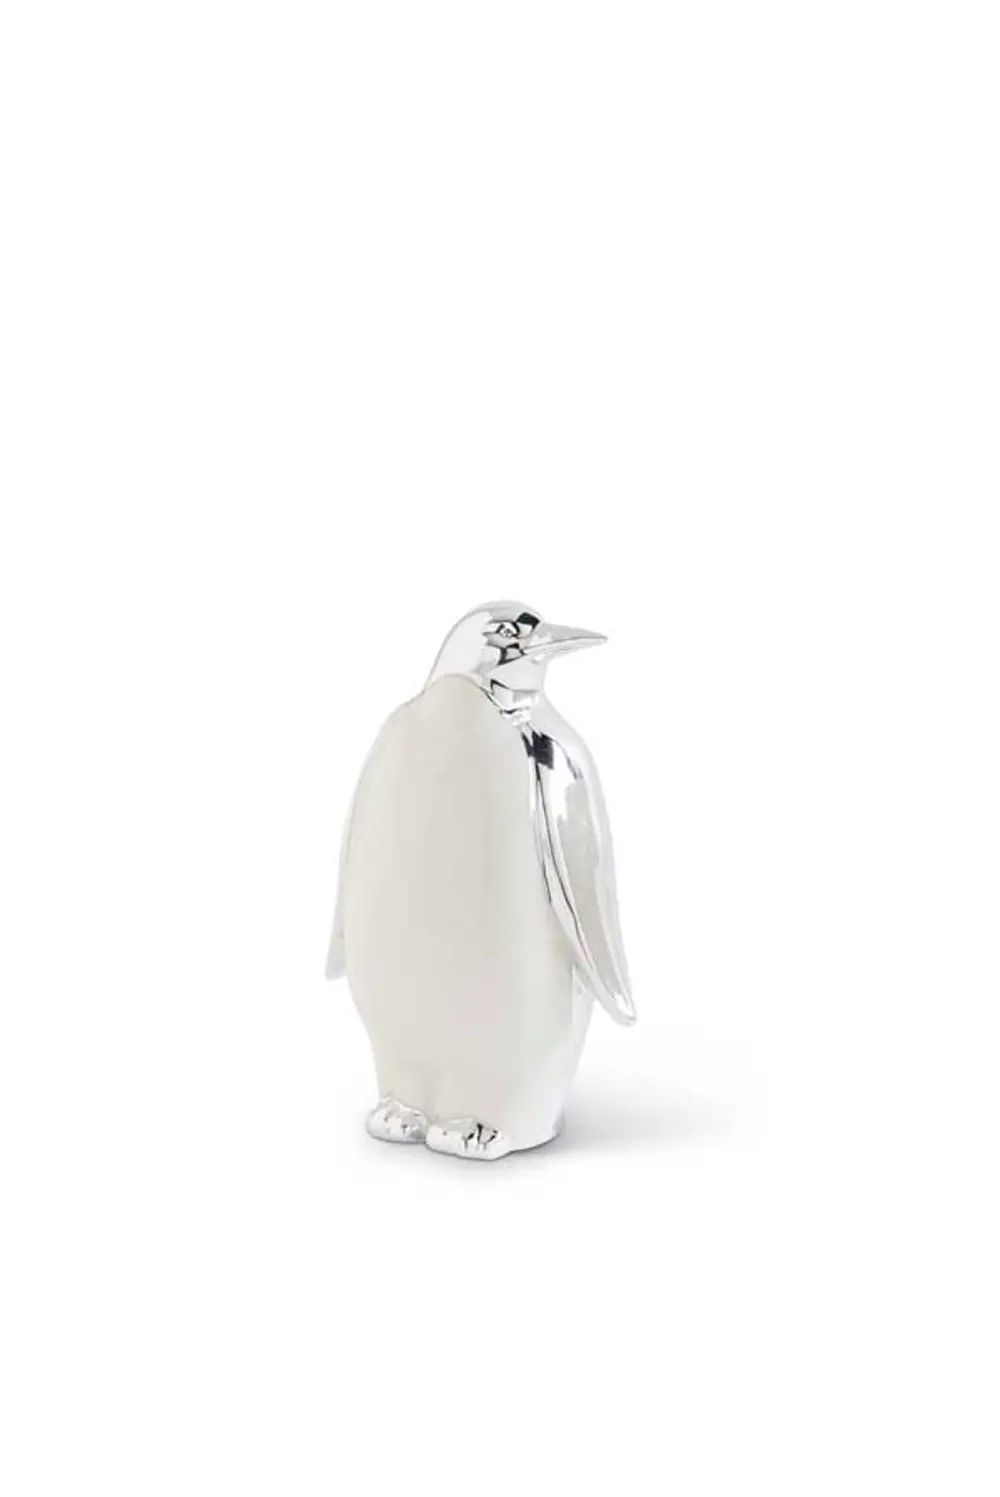 6 Inch White and Silver Penguin-1